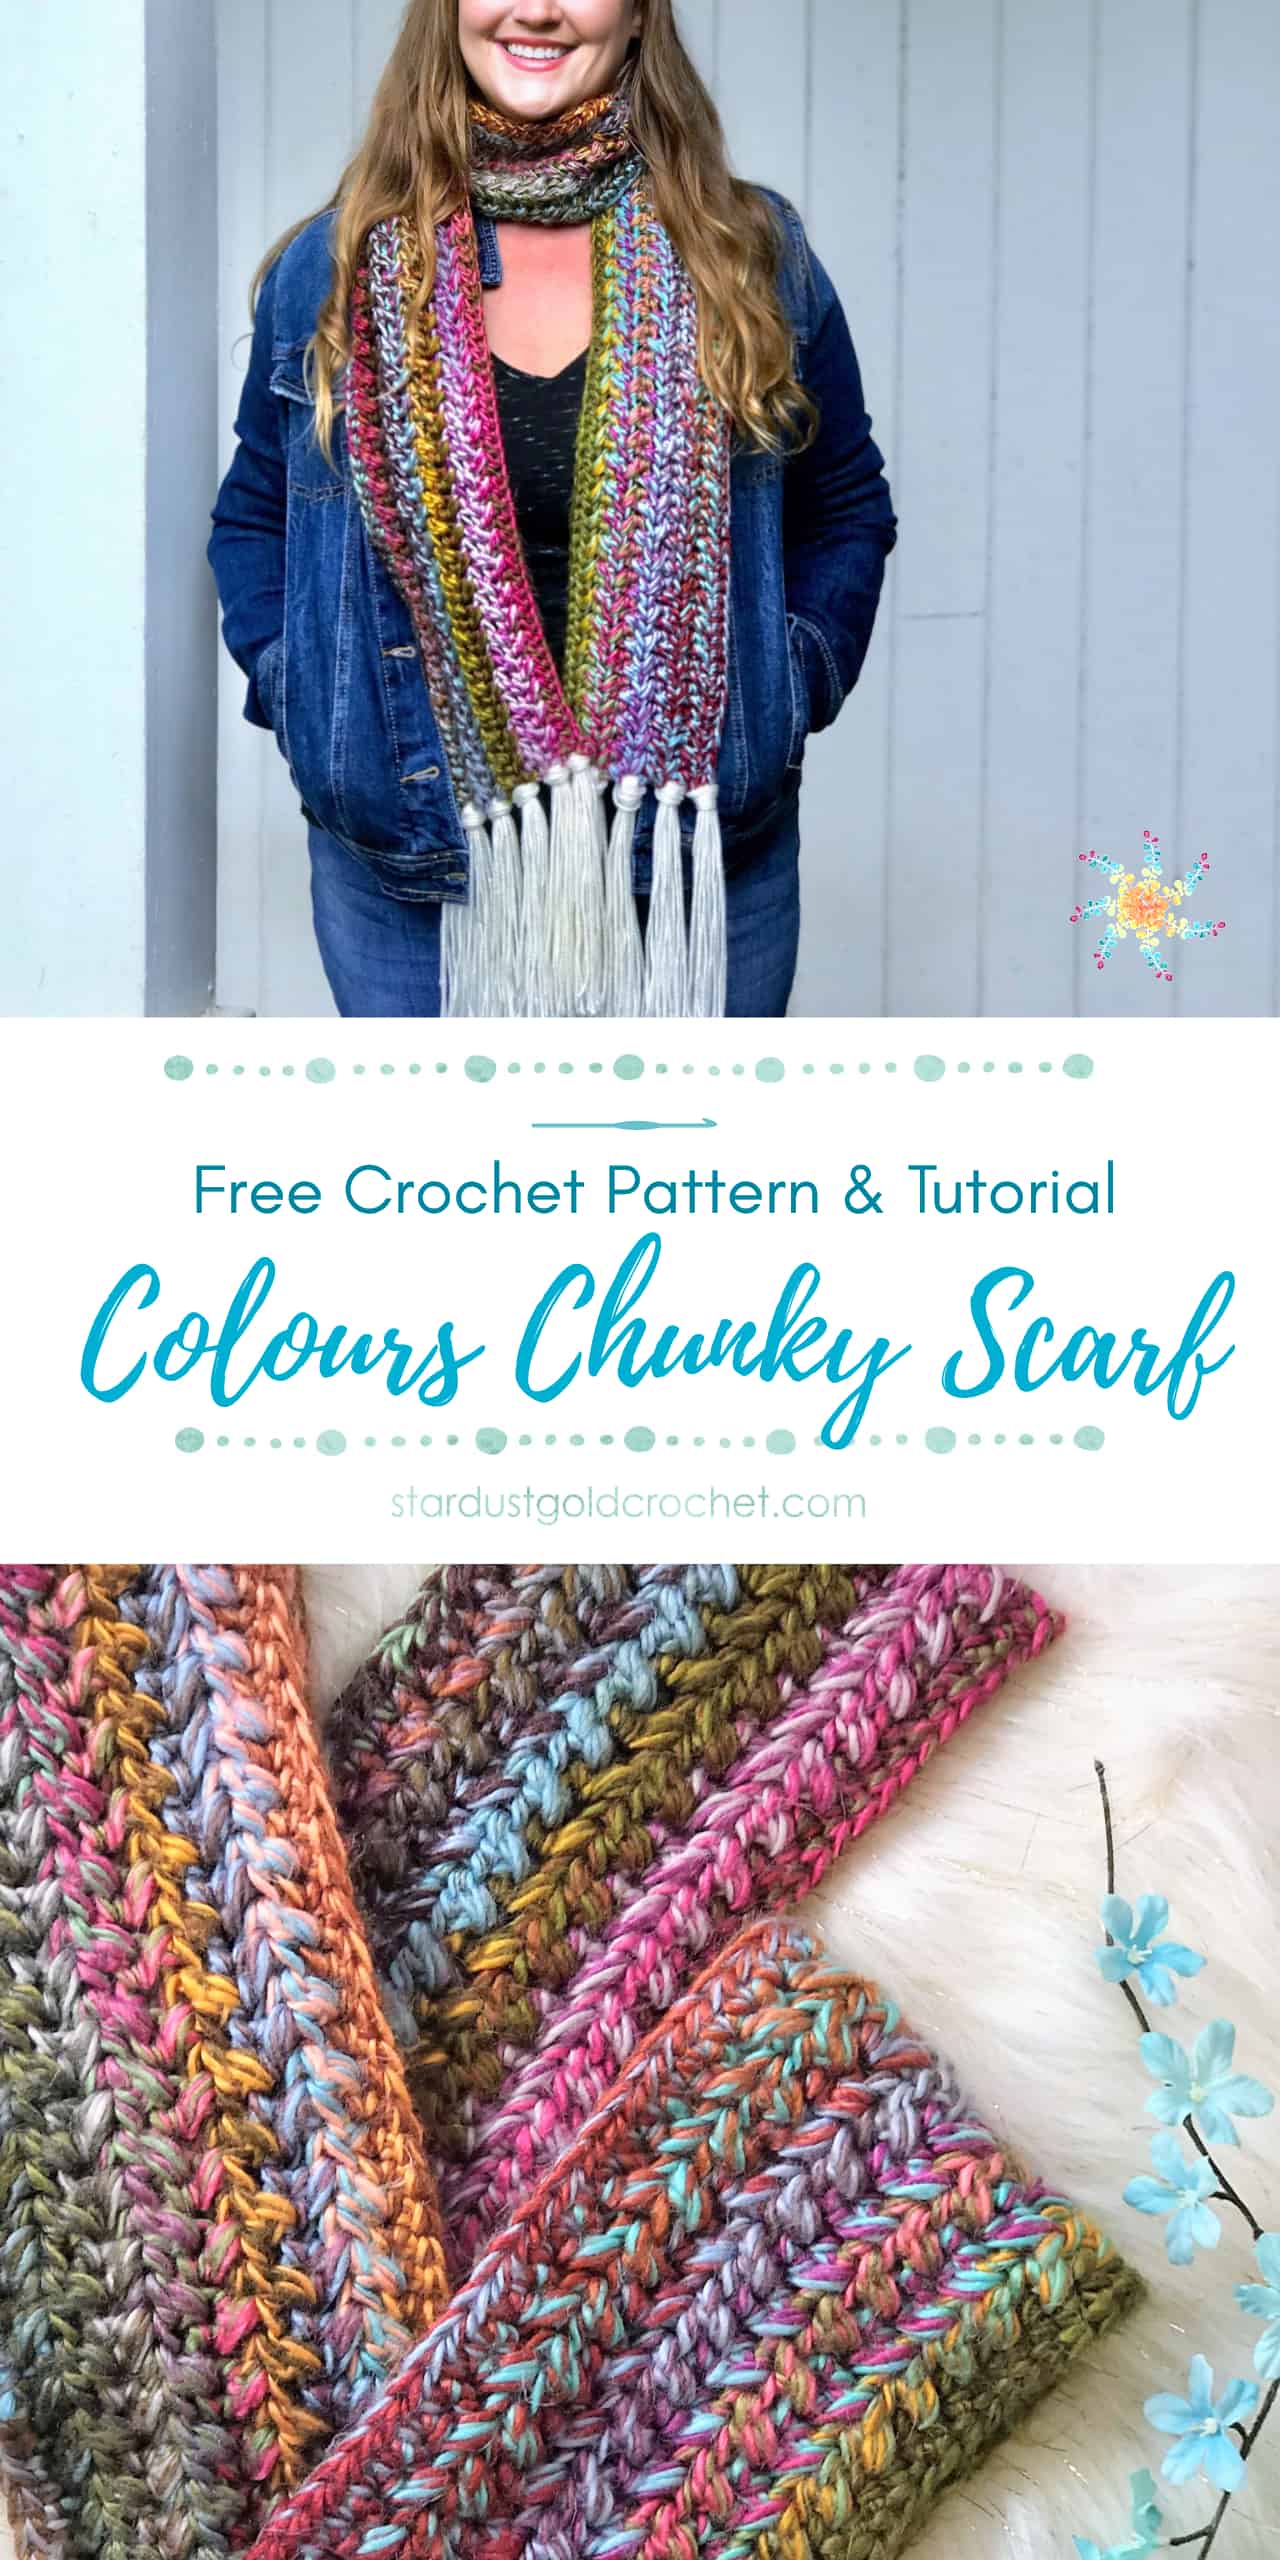 Colors chunky scarf free crochet scarf pattern by stardust gold crochet pinterest pin